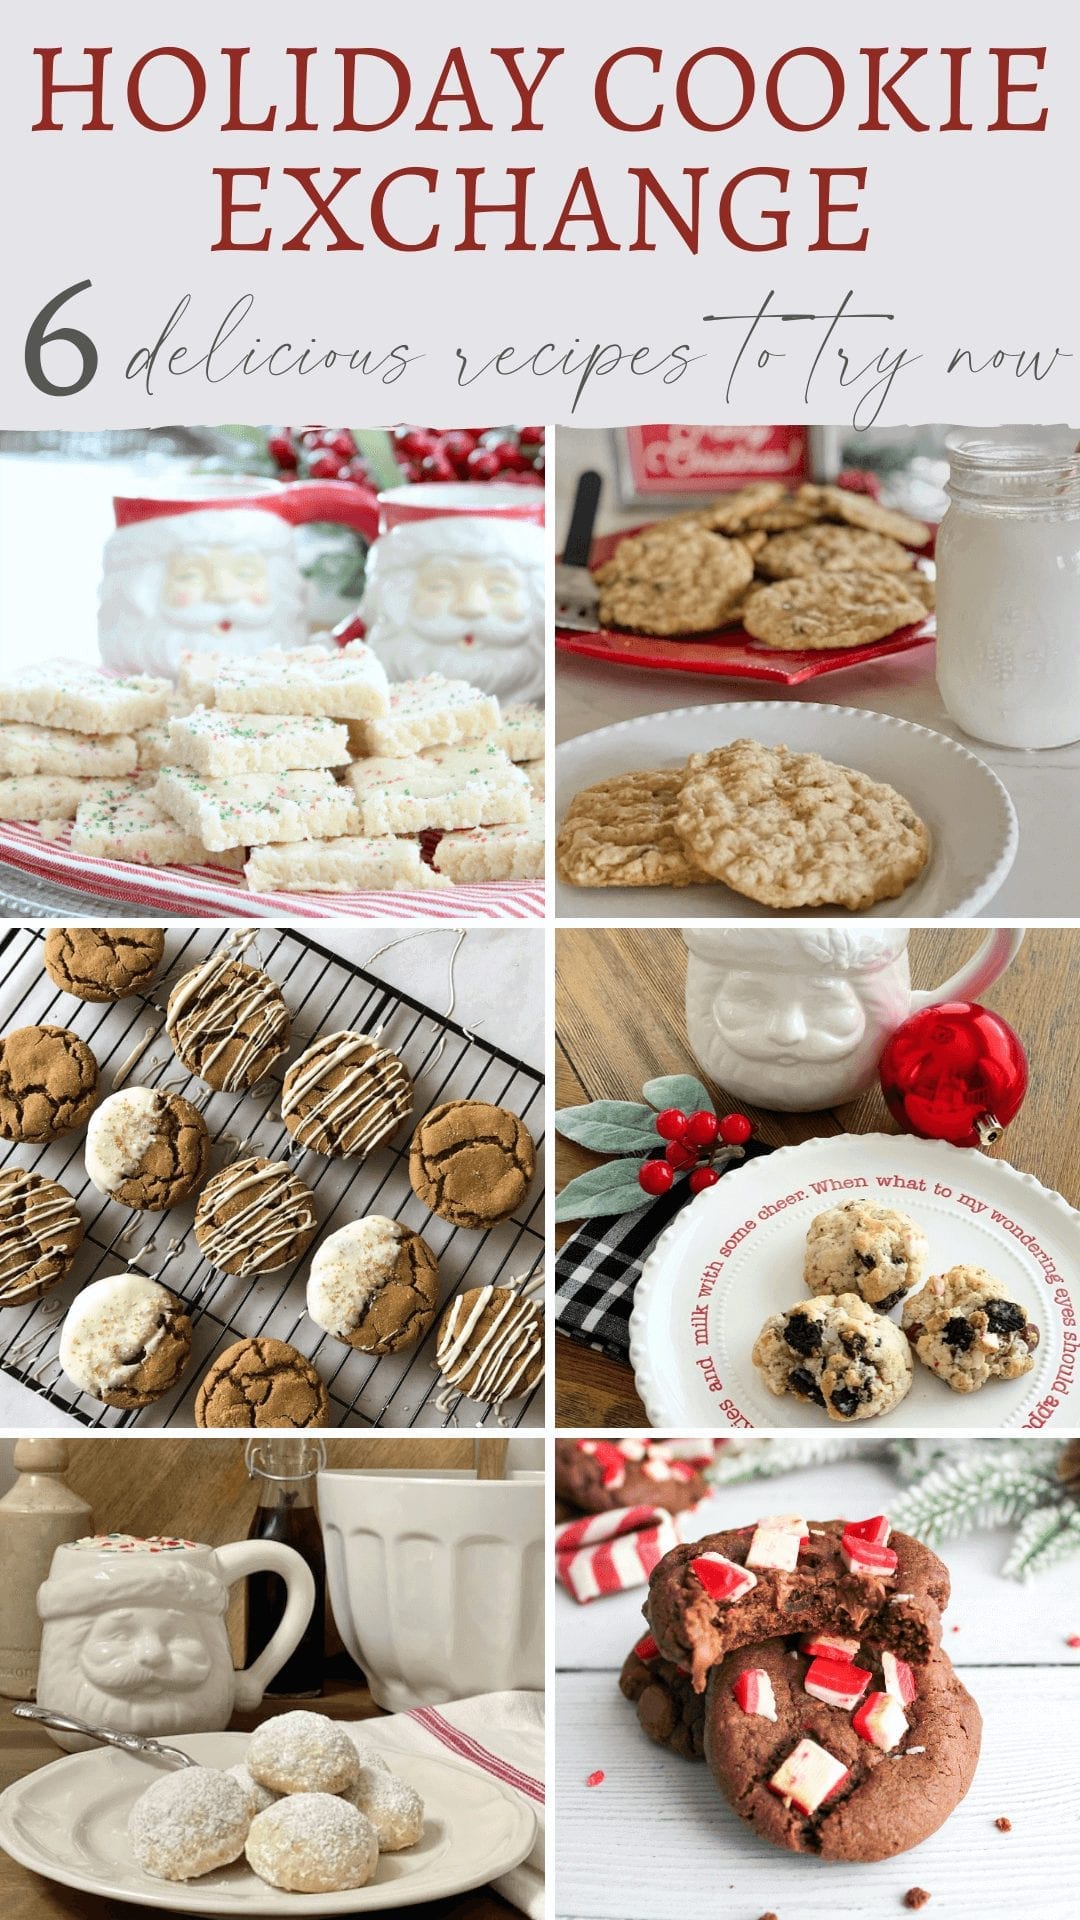 6 delicious recipes to try for holiday cookies!